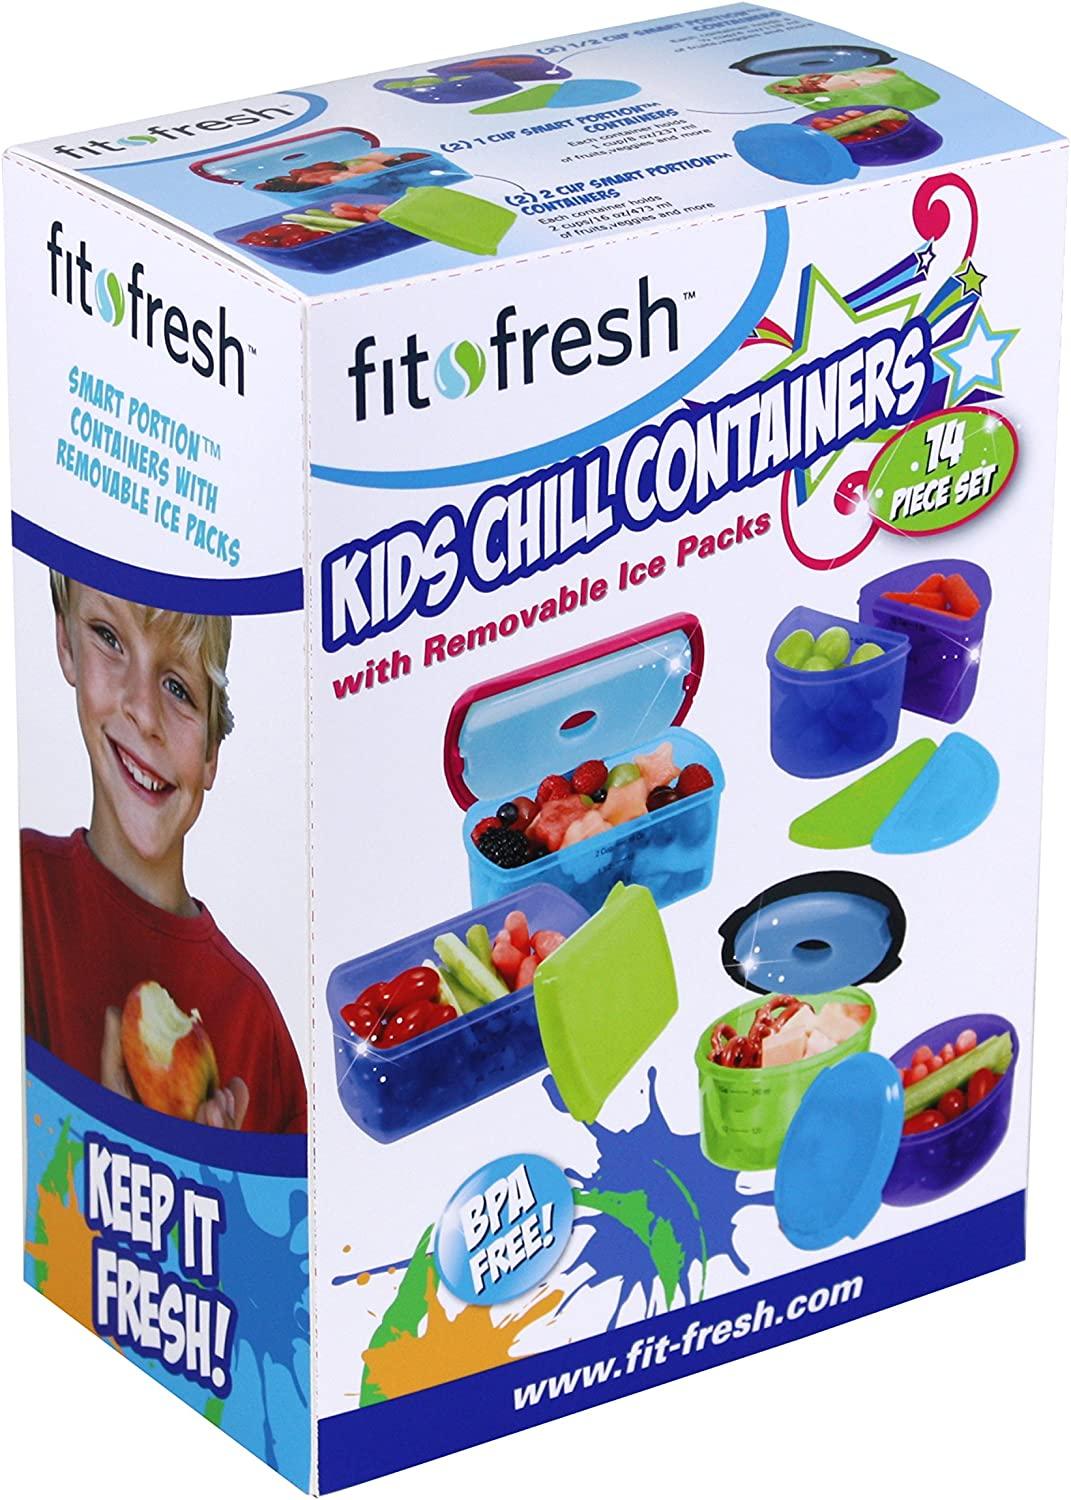 Fit and Fresh Snack Set Containers + Ice Packs, 6 pc - Kroger